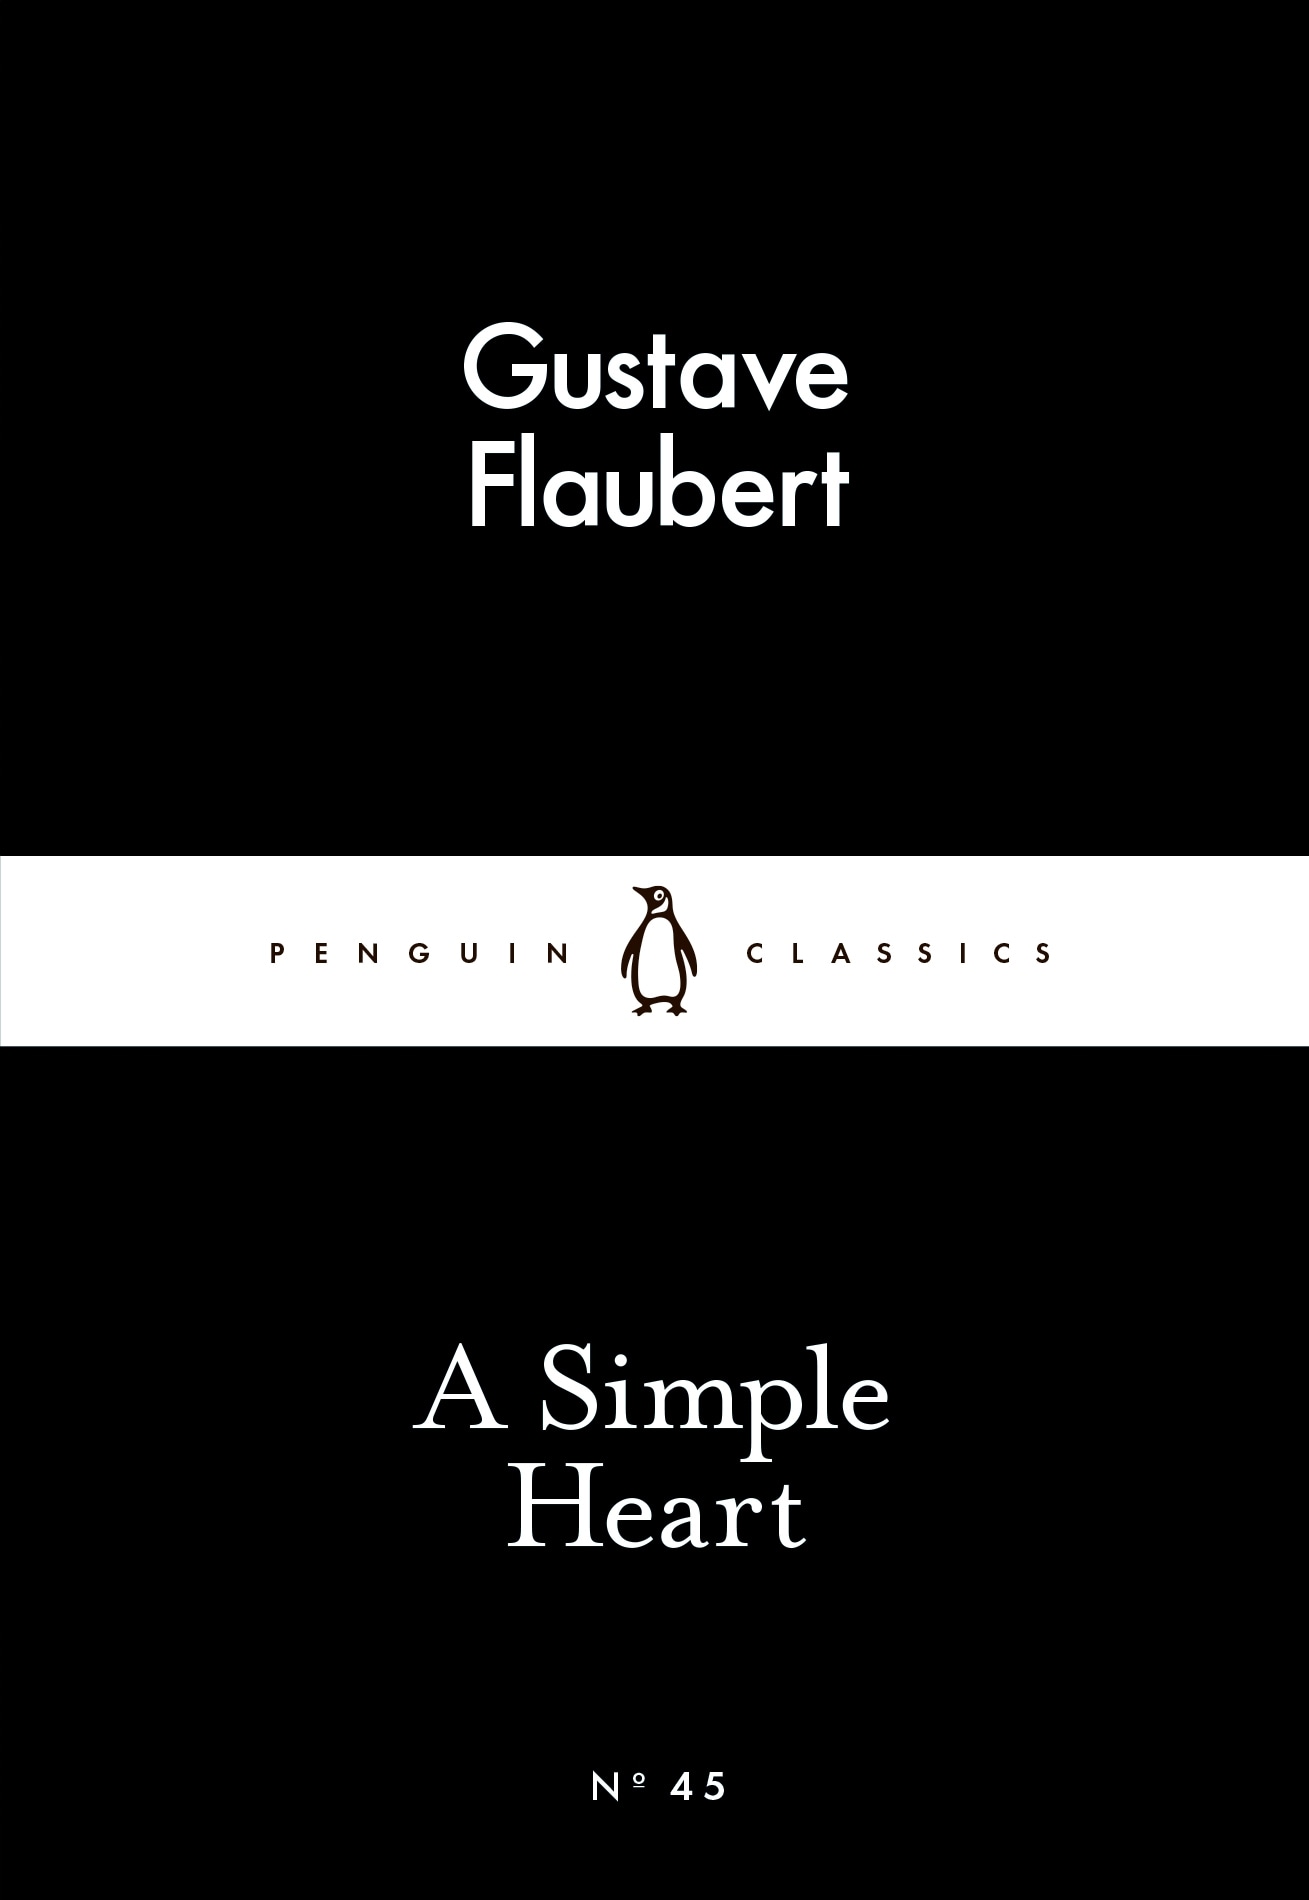 Book “A Simple Heart” by Gustave Flaubert — February 26, 2015